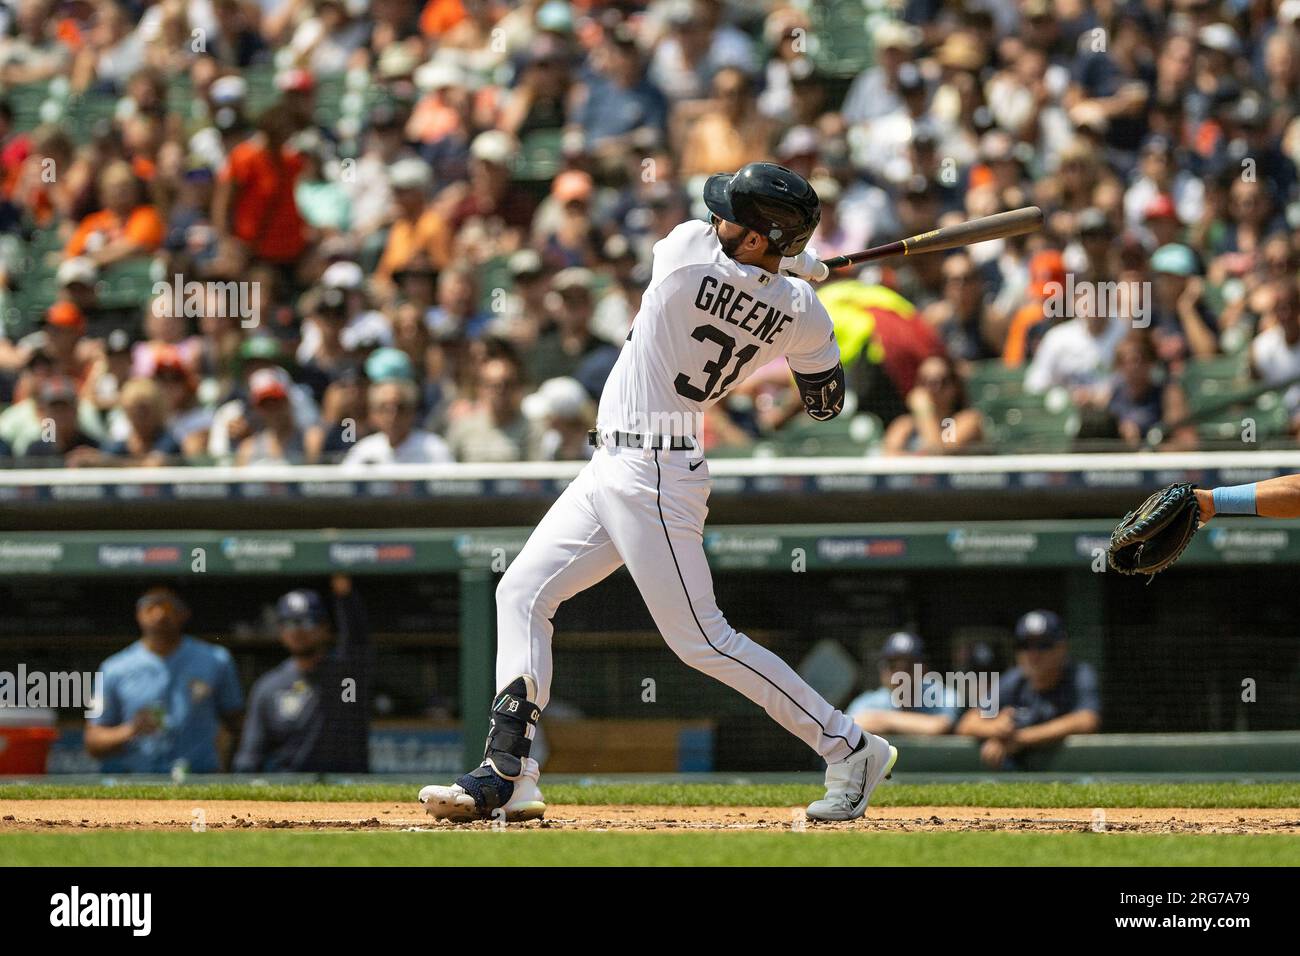 DETROIT, MI - AUGUST 05: Detroit Tigers CF Riley Greene (31) at bat during  game between Tampa Bay Rays and Detroit Tigers on August 5, 2023 at  Comerica Park in Detroit, MI (